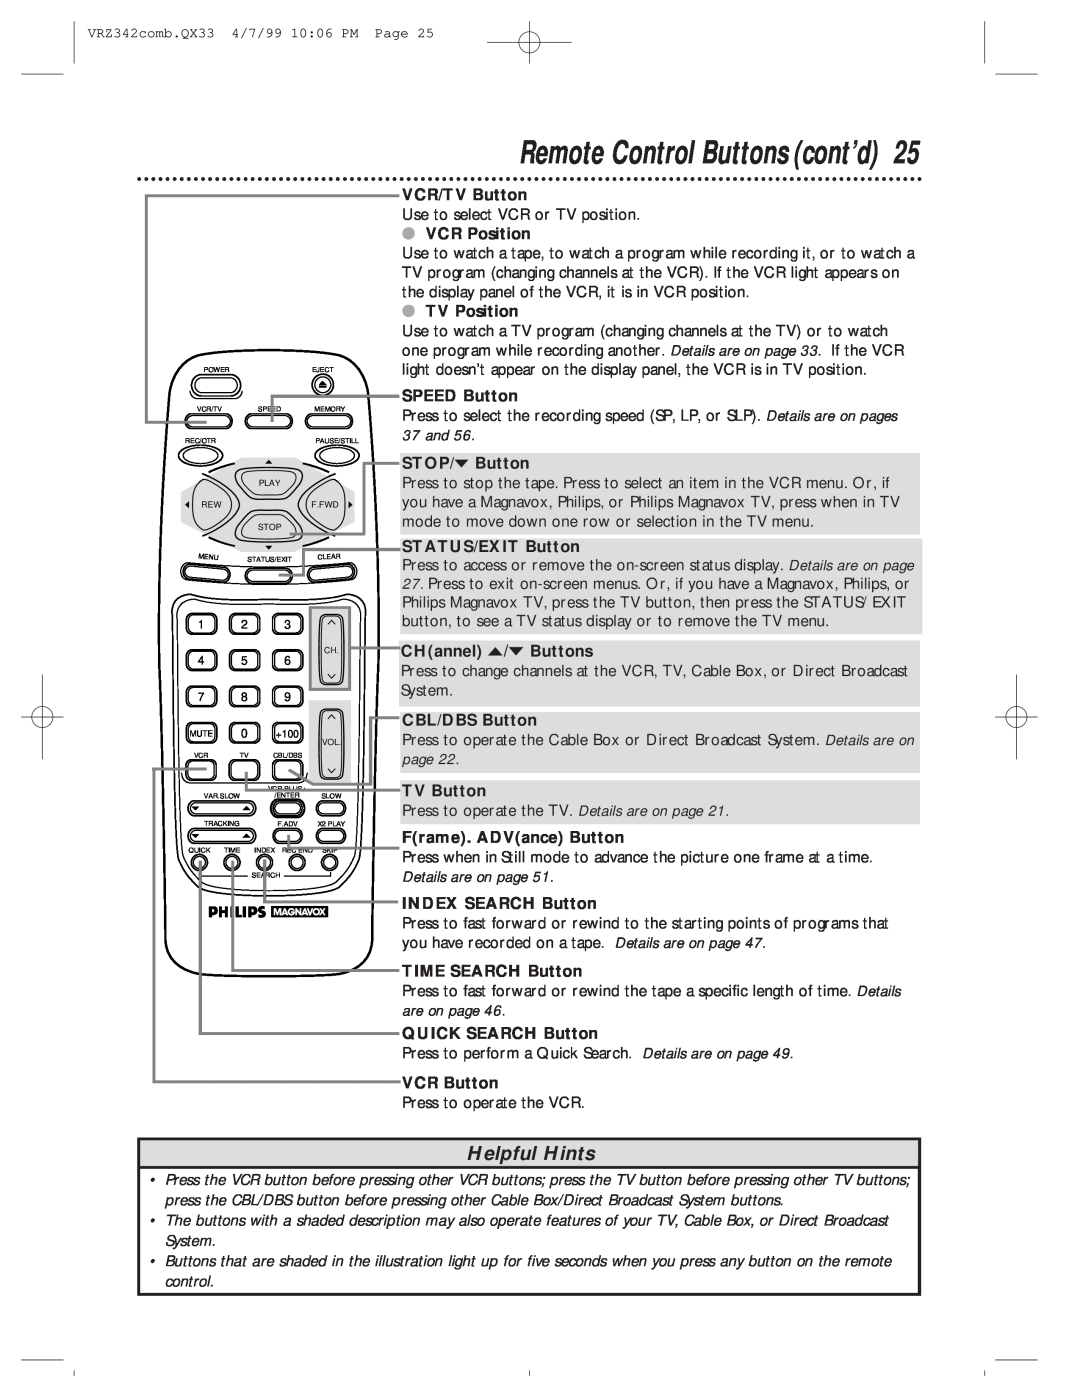 Magnavox VRZ342AT99 owner manual Remote Control Buttons cont’d, Helpful Hints 